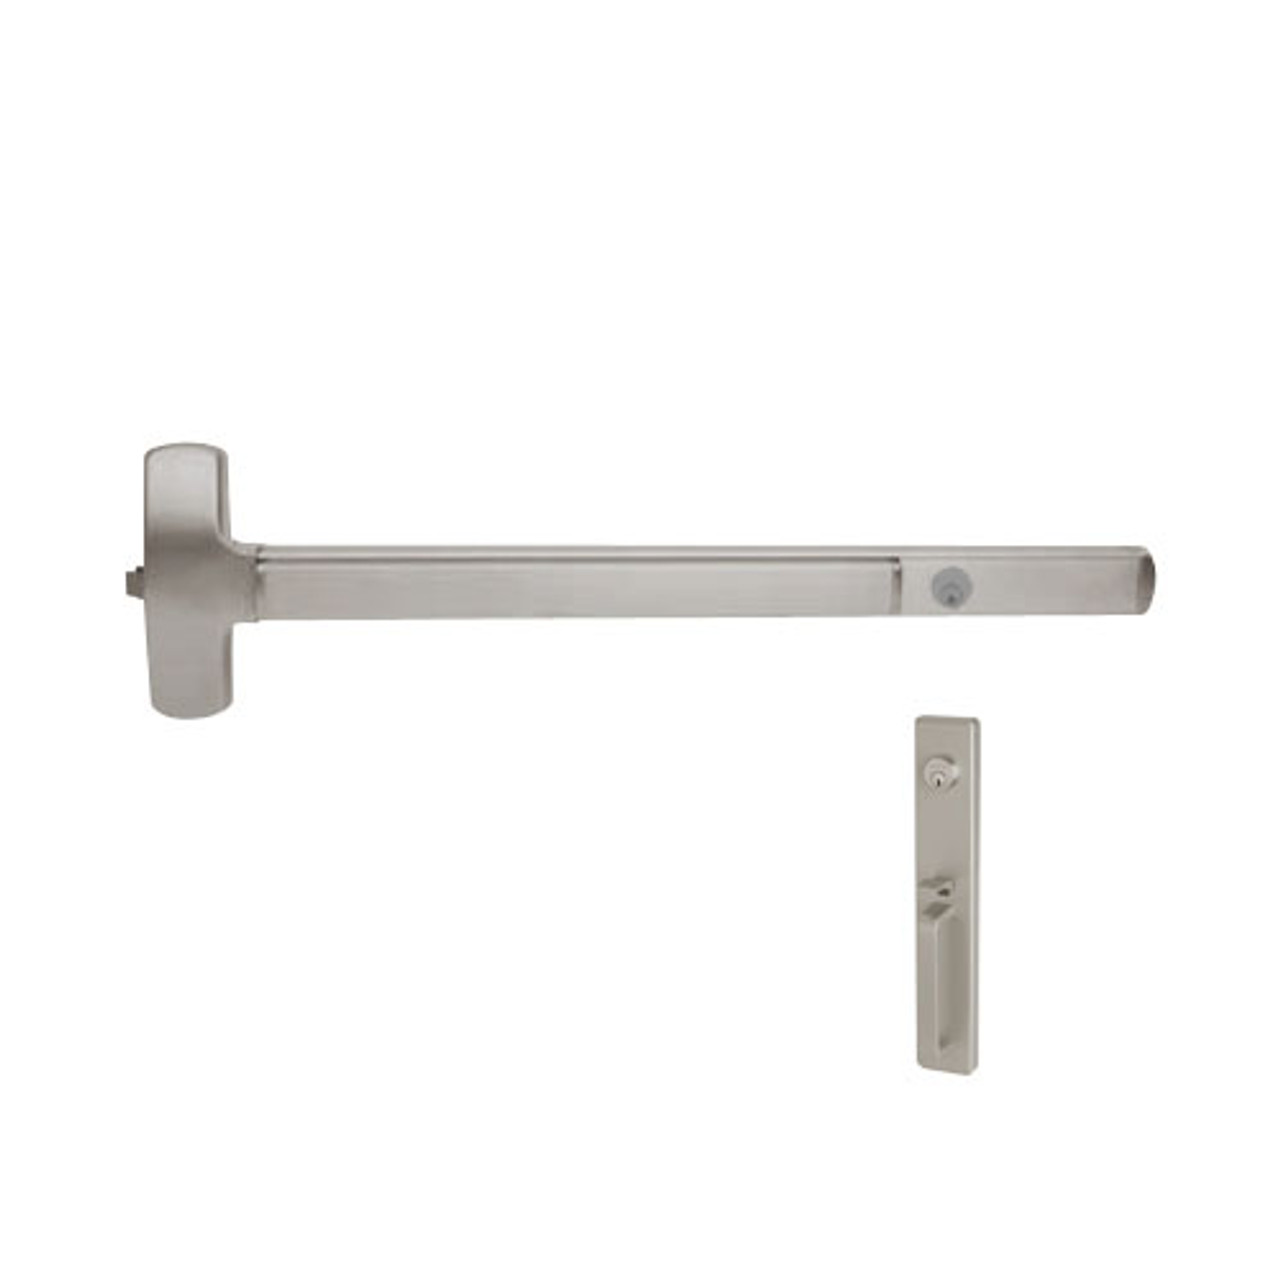 CD25-R-TP-US32D-4 Falcon Exit Device in Satin Stainless Steel